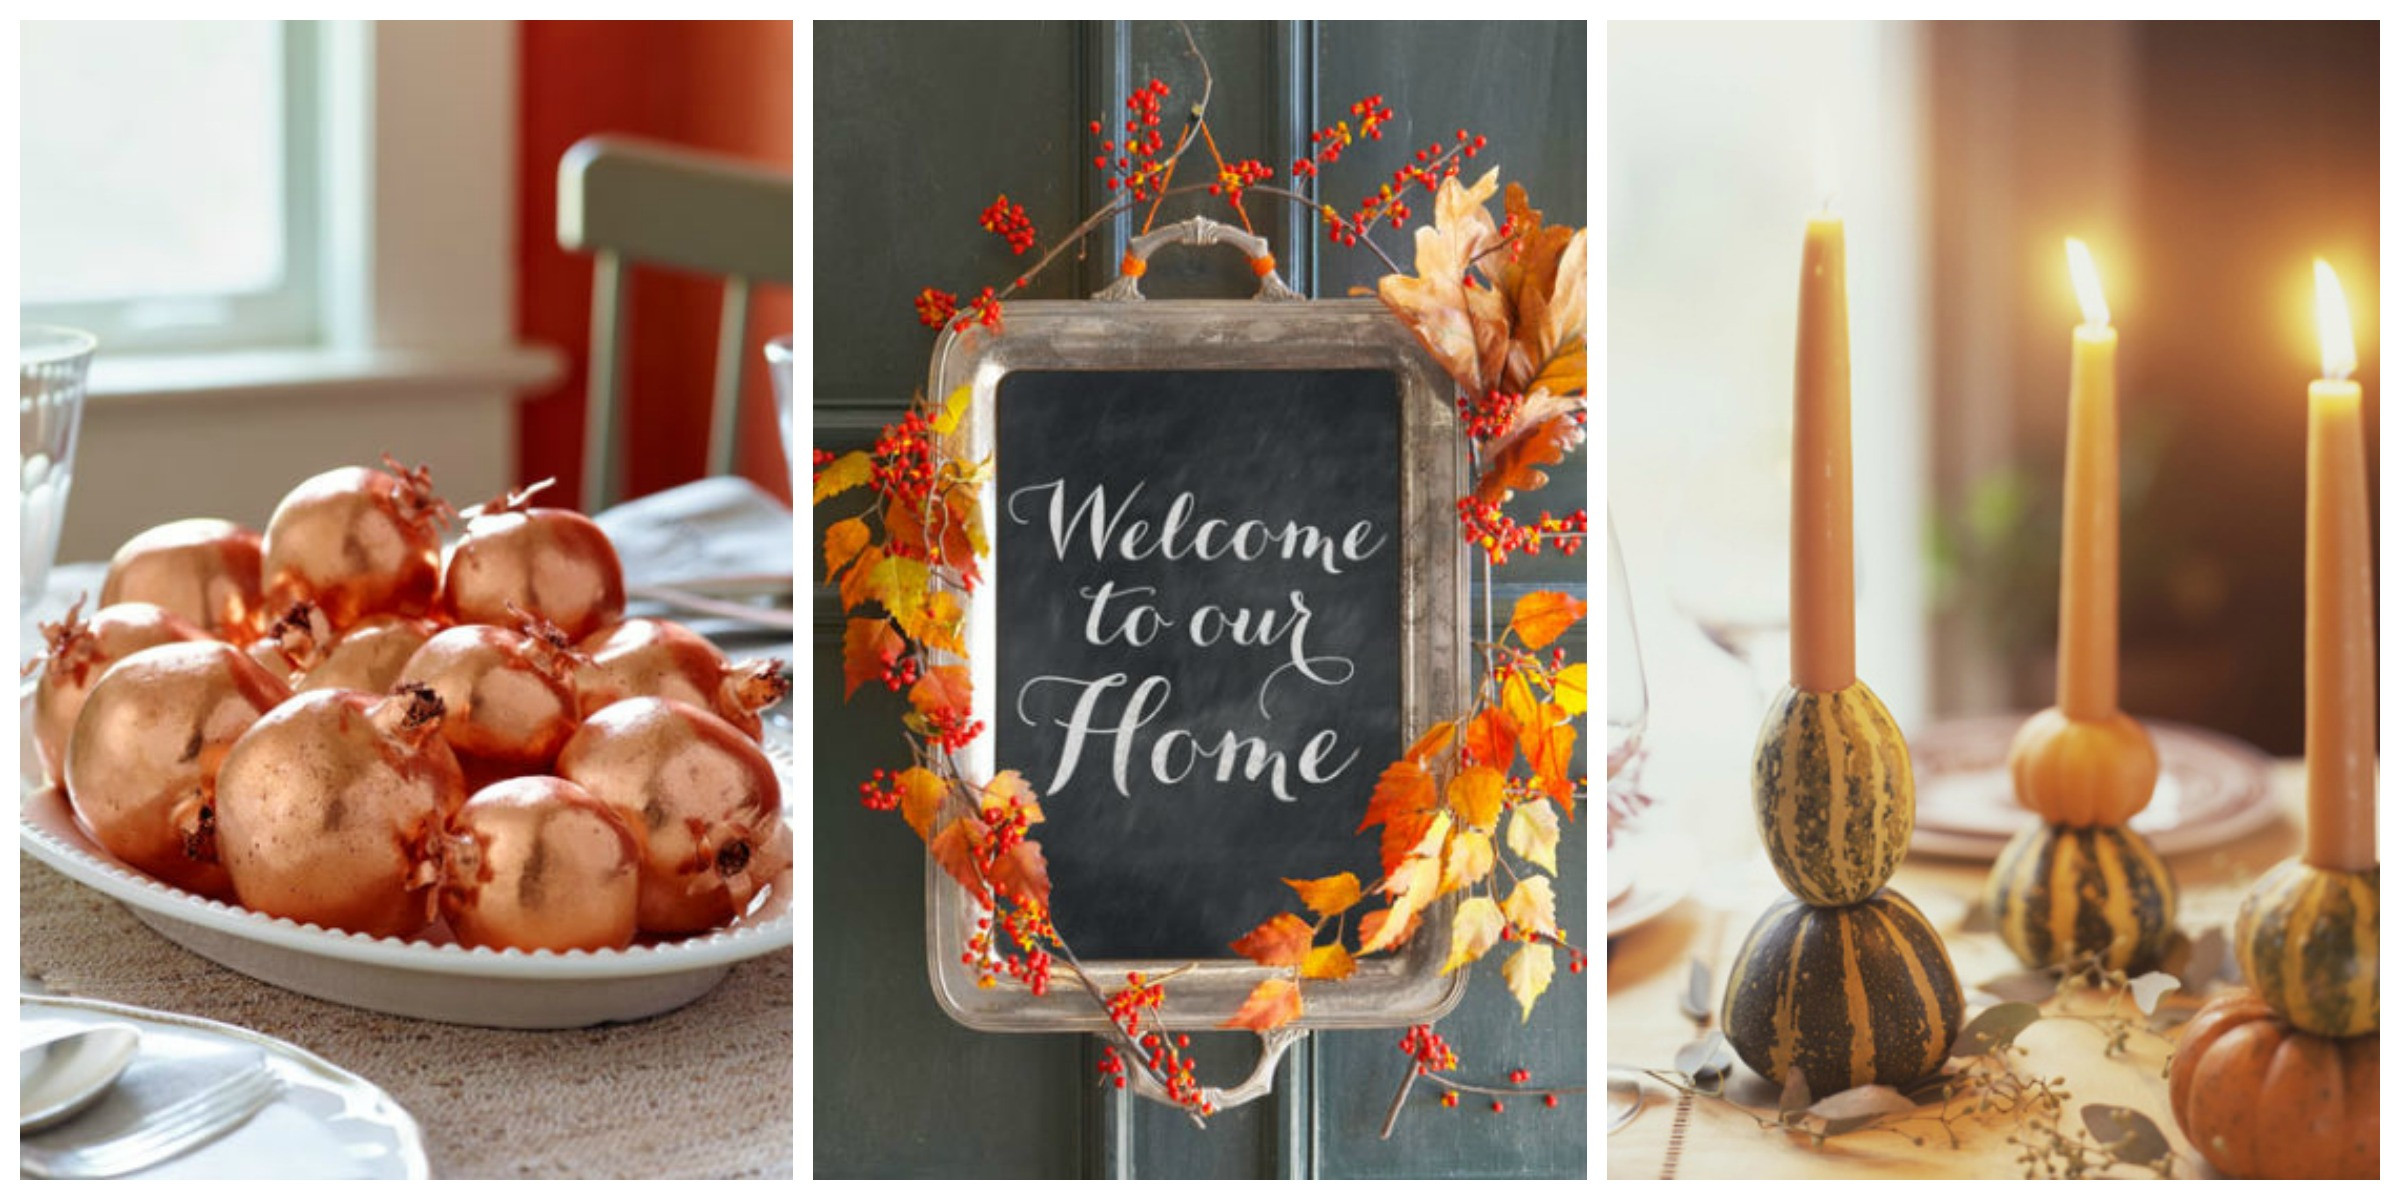 Thanksgiving Home Decor Ideas
 40 Easy DIY Thanksgiving Decorations Best Ideas for